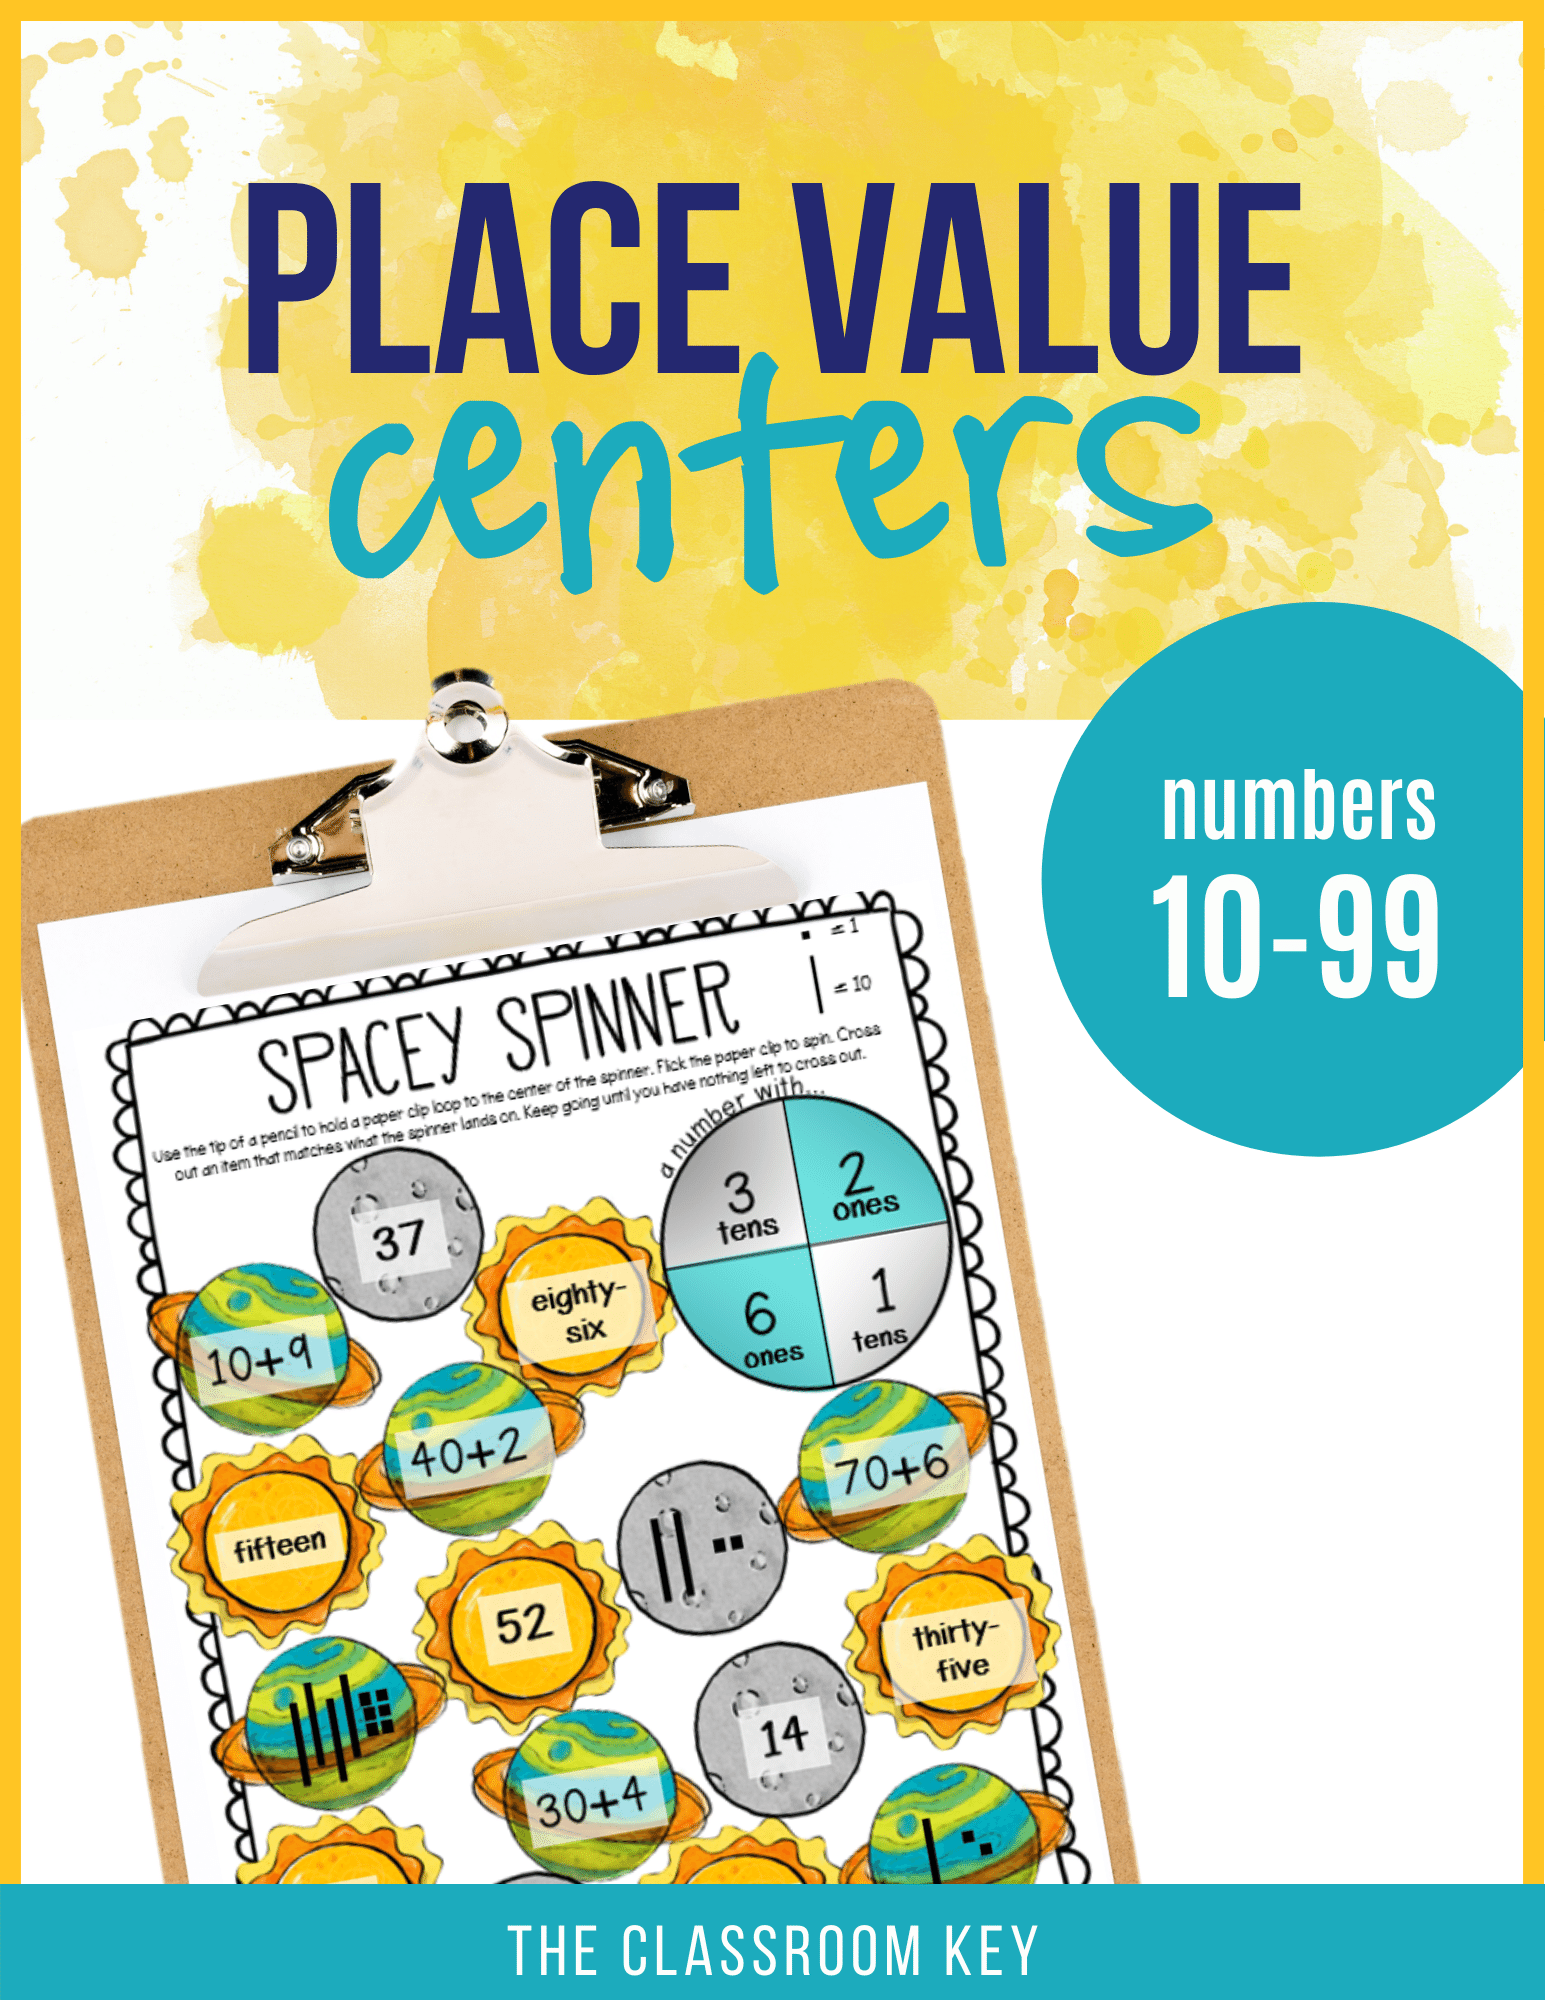 Teach place value the fun way with math center activities. These games focus on the numbers 10-99, perfect for 1st grade. Skills include tens and ones, base-10 models, expanded form, number words, and decomposing numbers. Common Core skills addressed are 1.NBT.B.2, 1.NBT.B.2.A, 1.NBT.B.2.B, 1.NBT.B.2.C